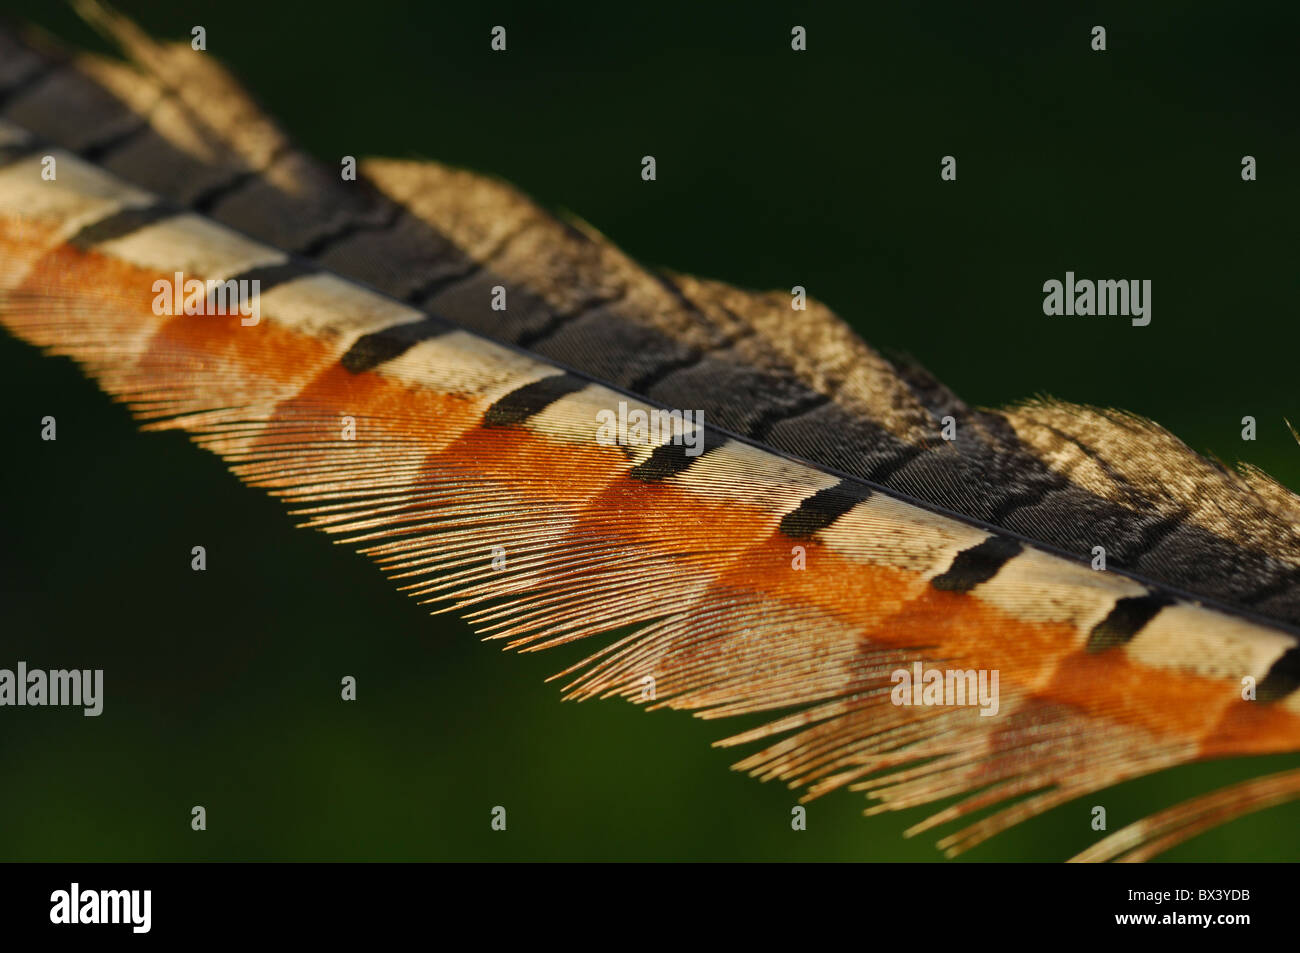 Ring-necked pheasant feather (Phasianus colchicus) Stock Photo